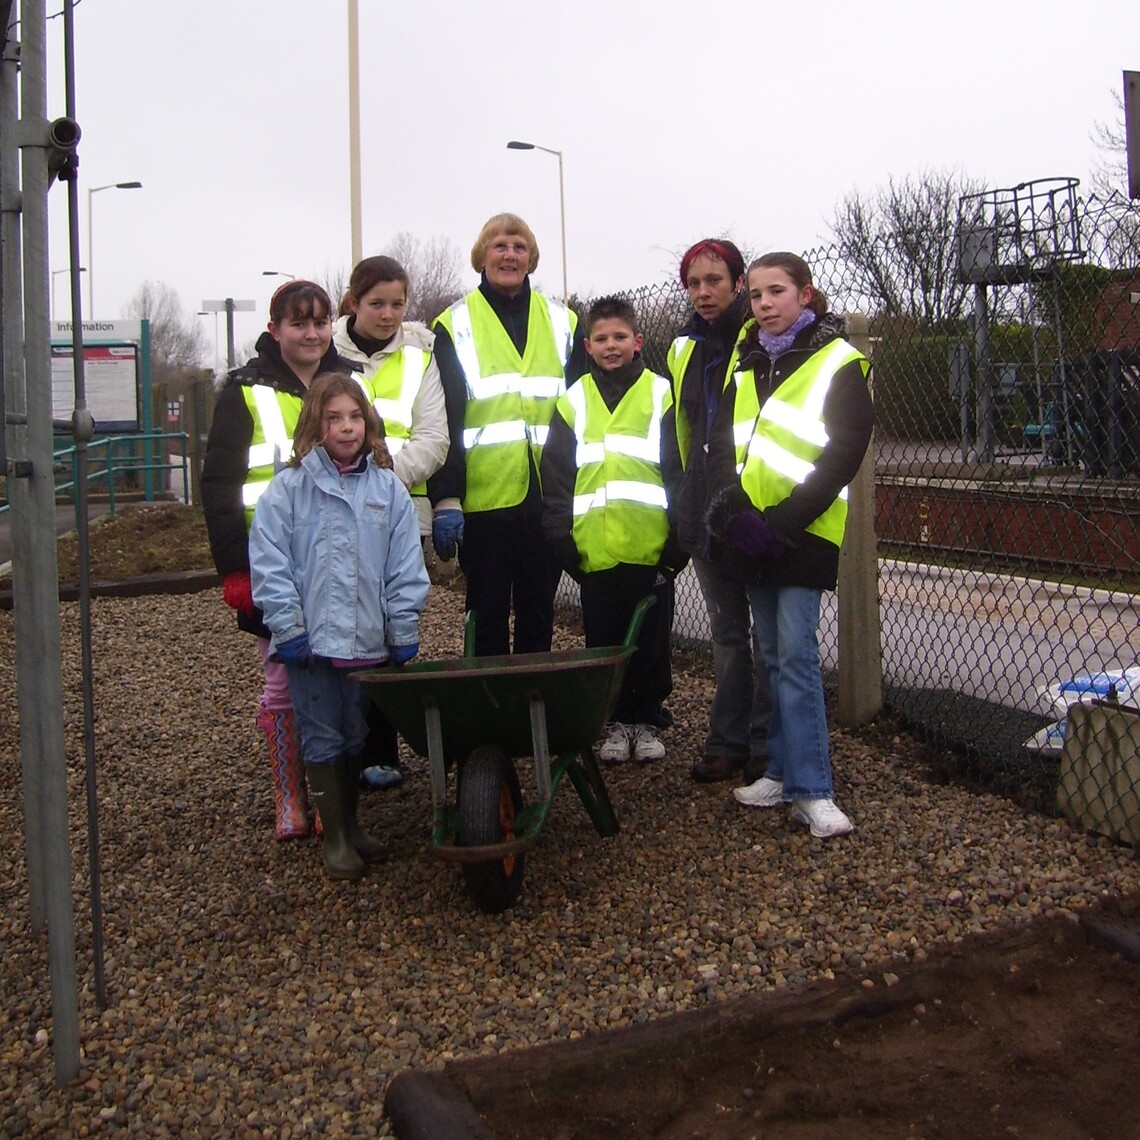 Group photo, of the team, creating the beach bed, Hunmanby Railway Station, March 2008